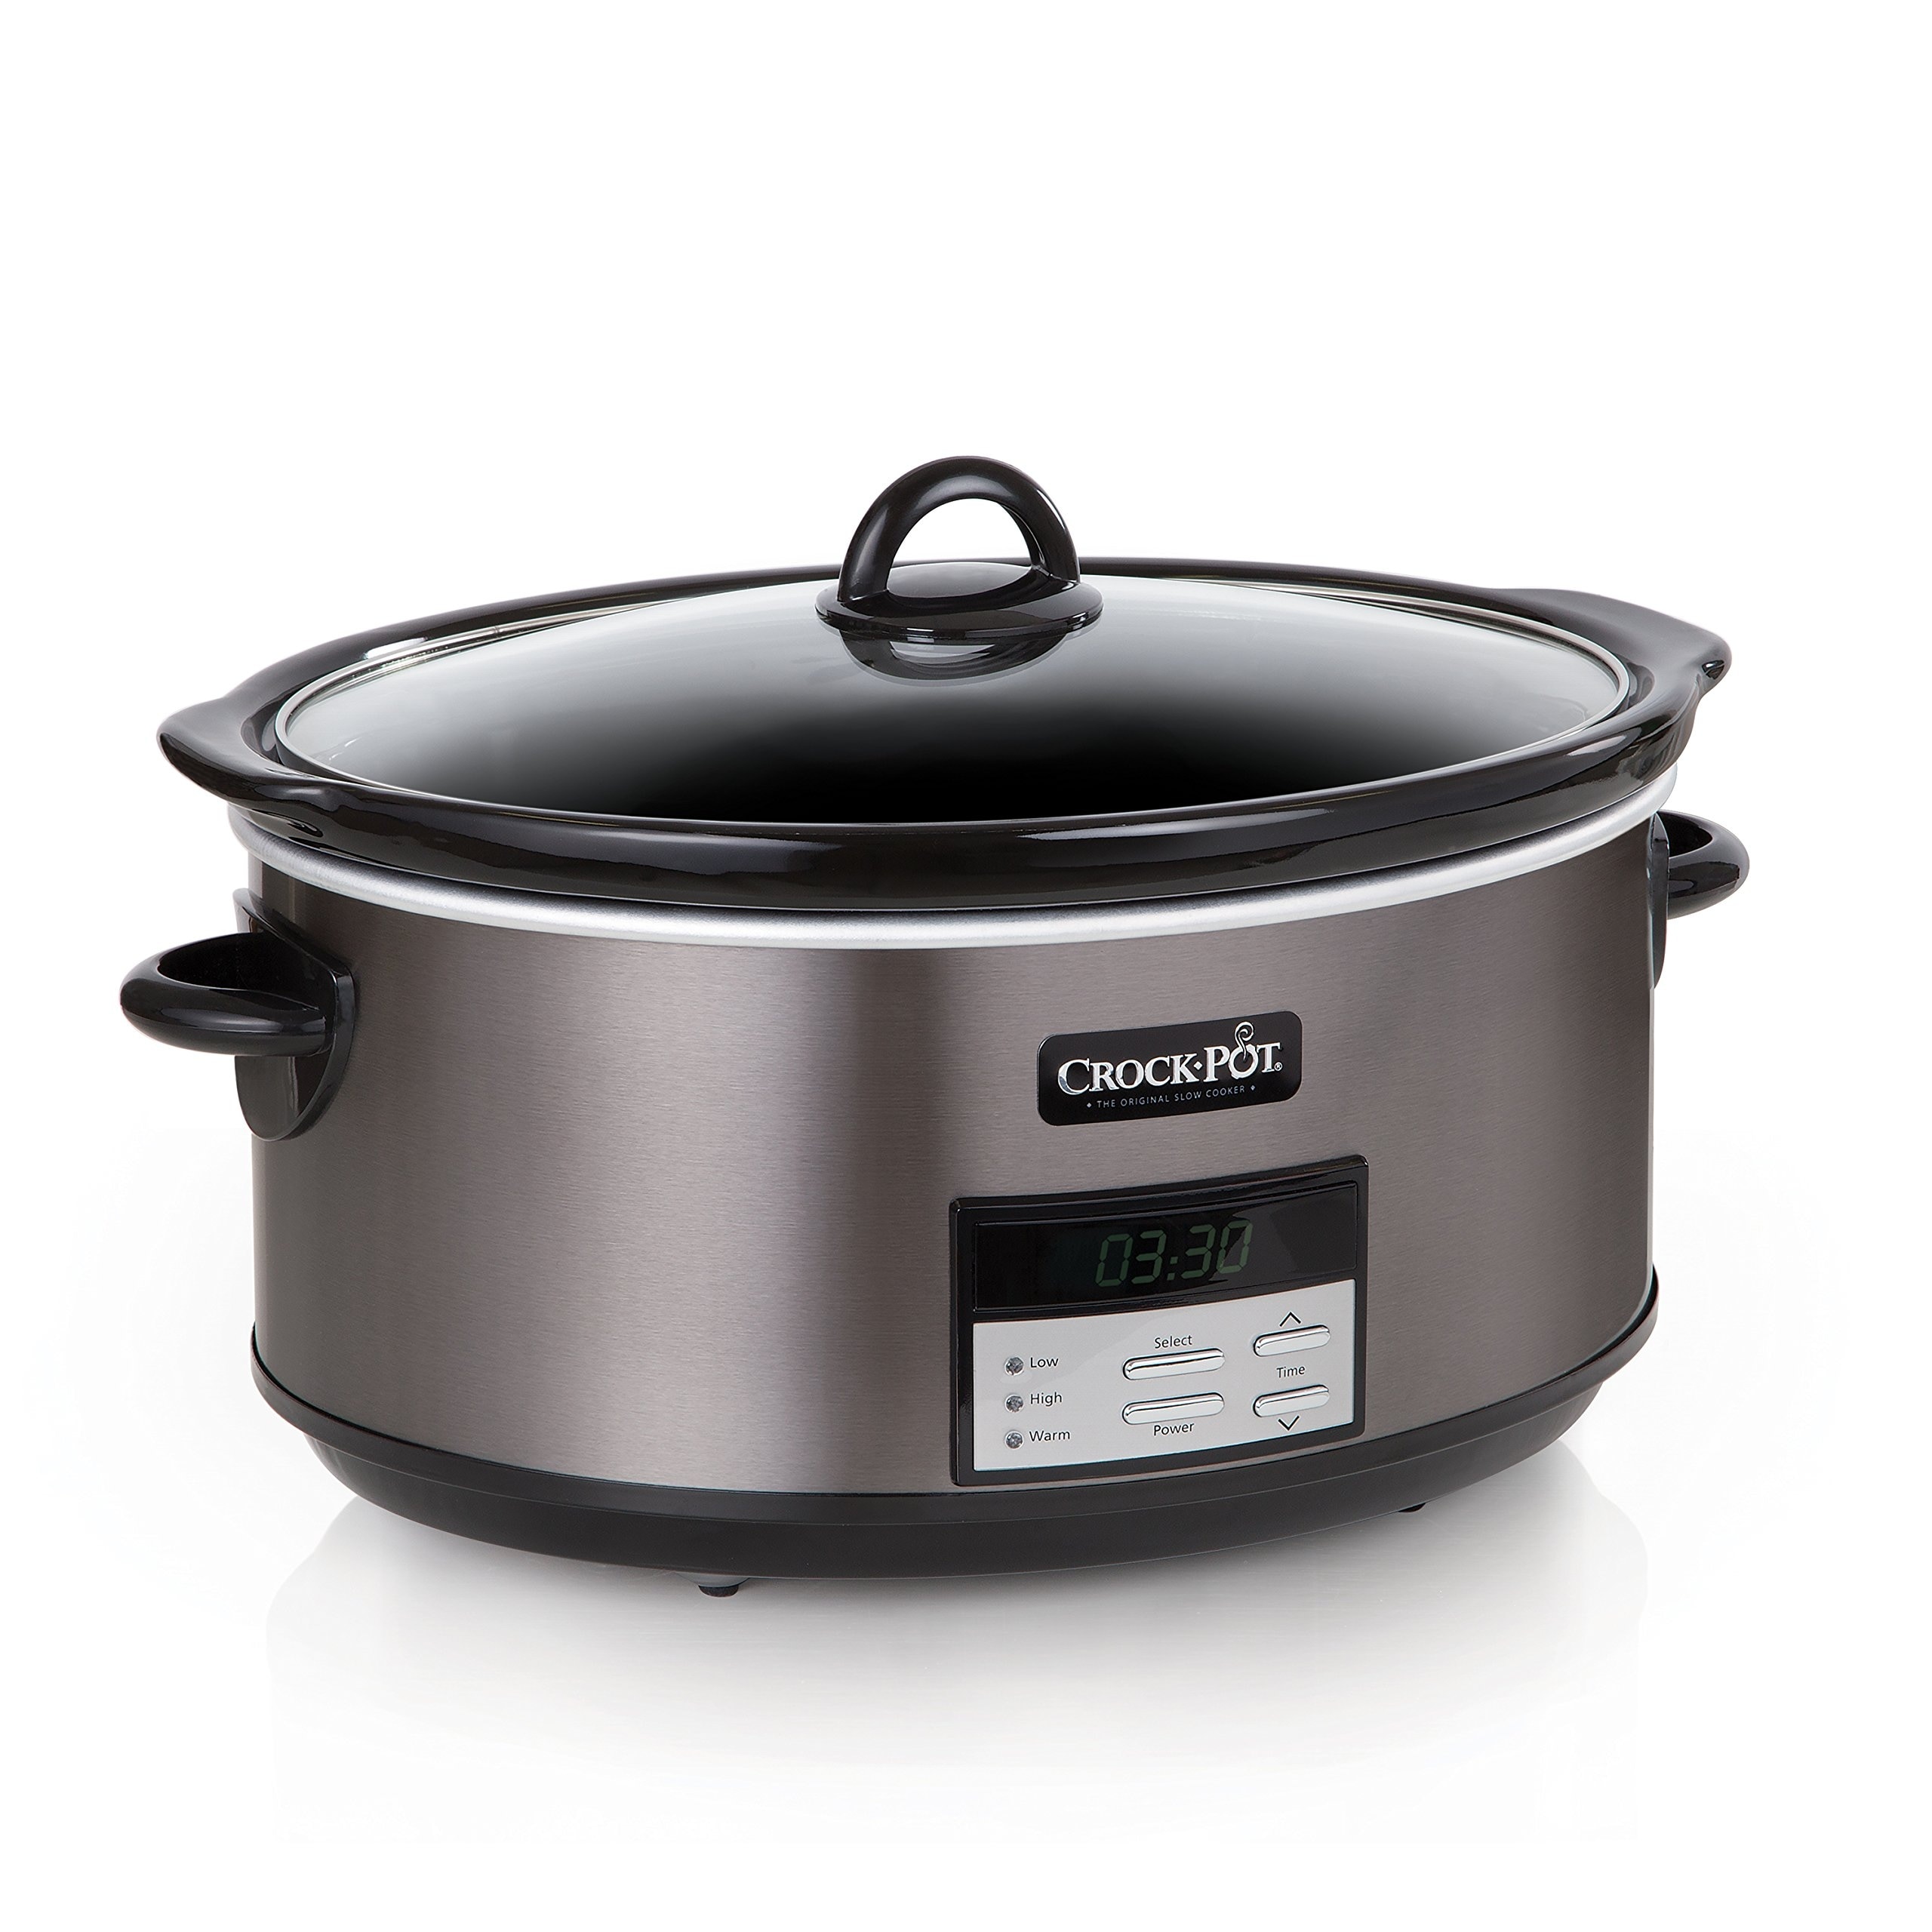  Crock-Pot 6 Quart Programmable Slow Cooker with Timer and Auto  Food Warmer Setting, Stainless Steel: Home & Kitchen